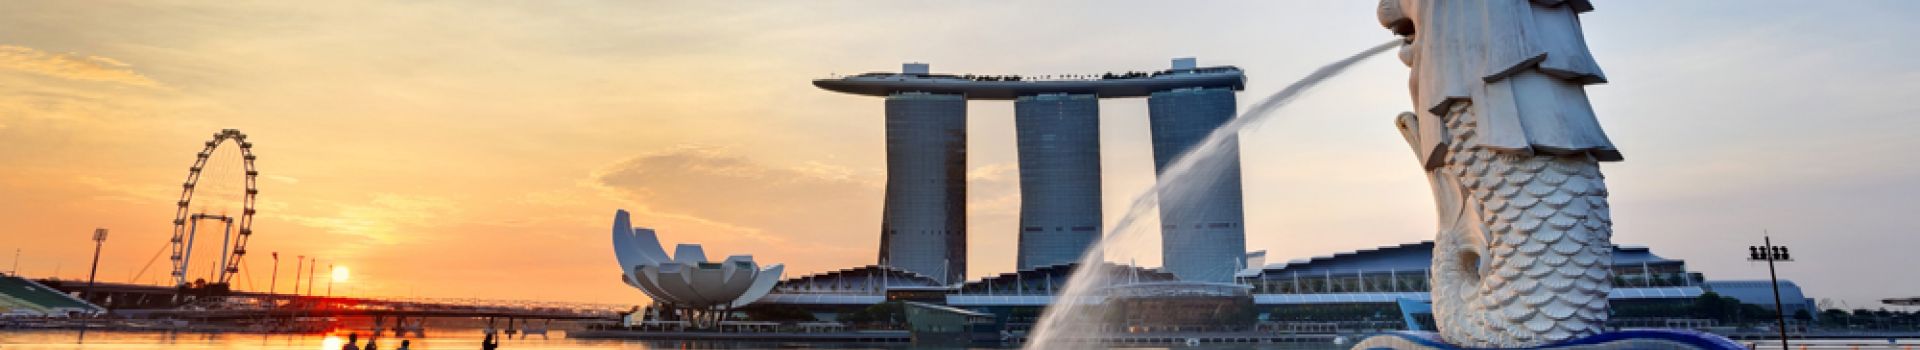 Country Destination Page - Holidays to Singapore - Cassidy Travel